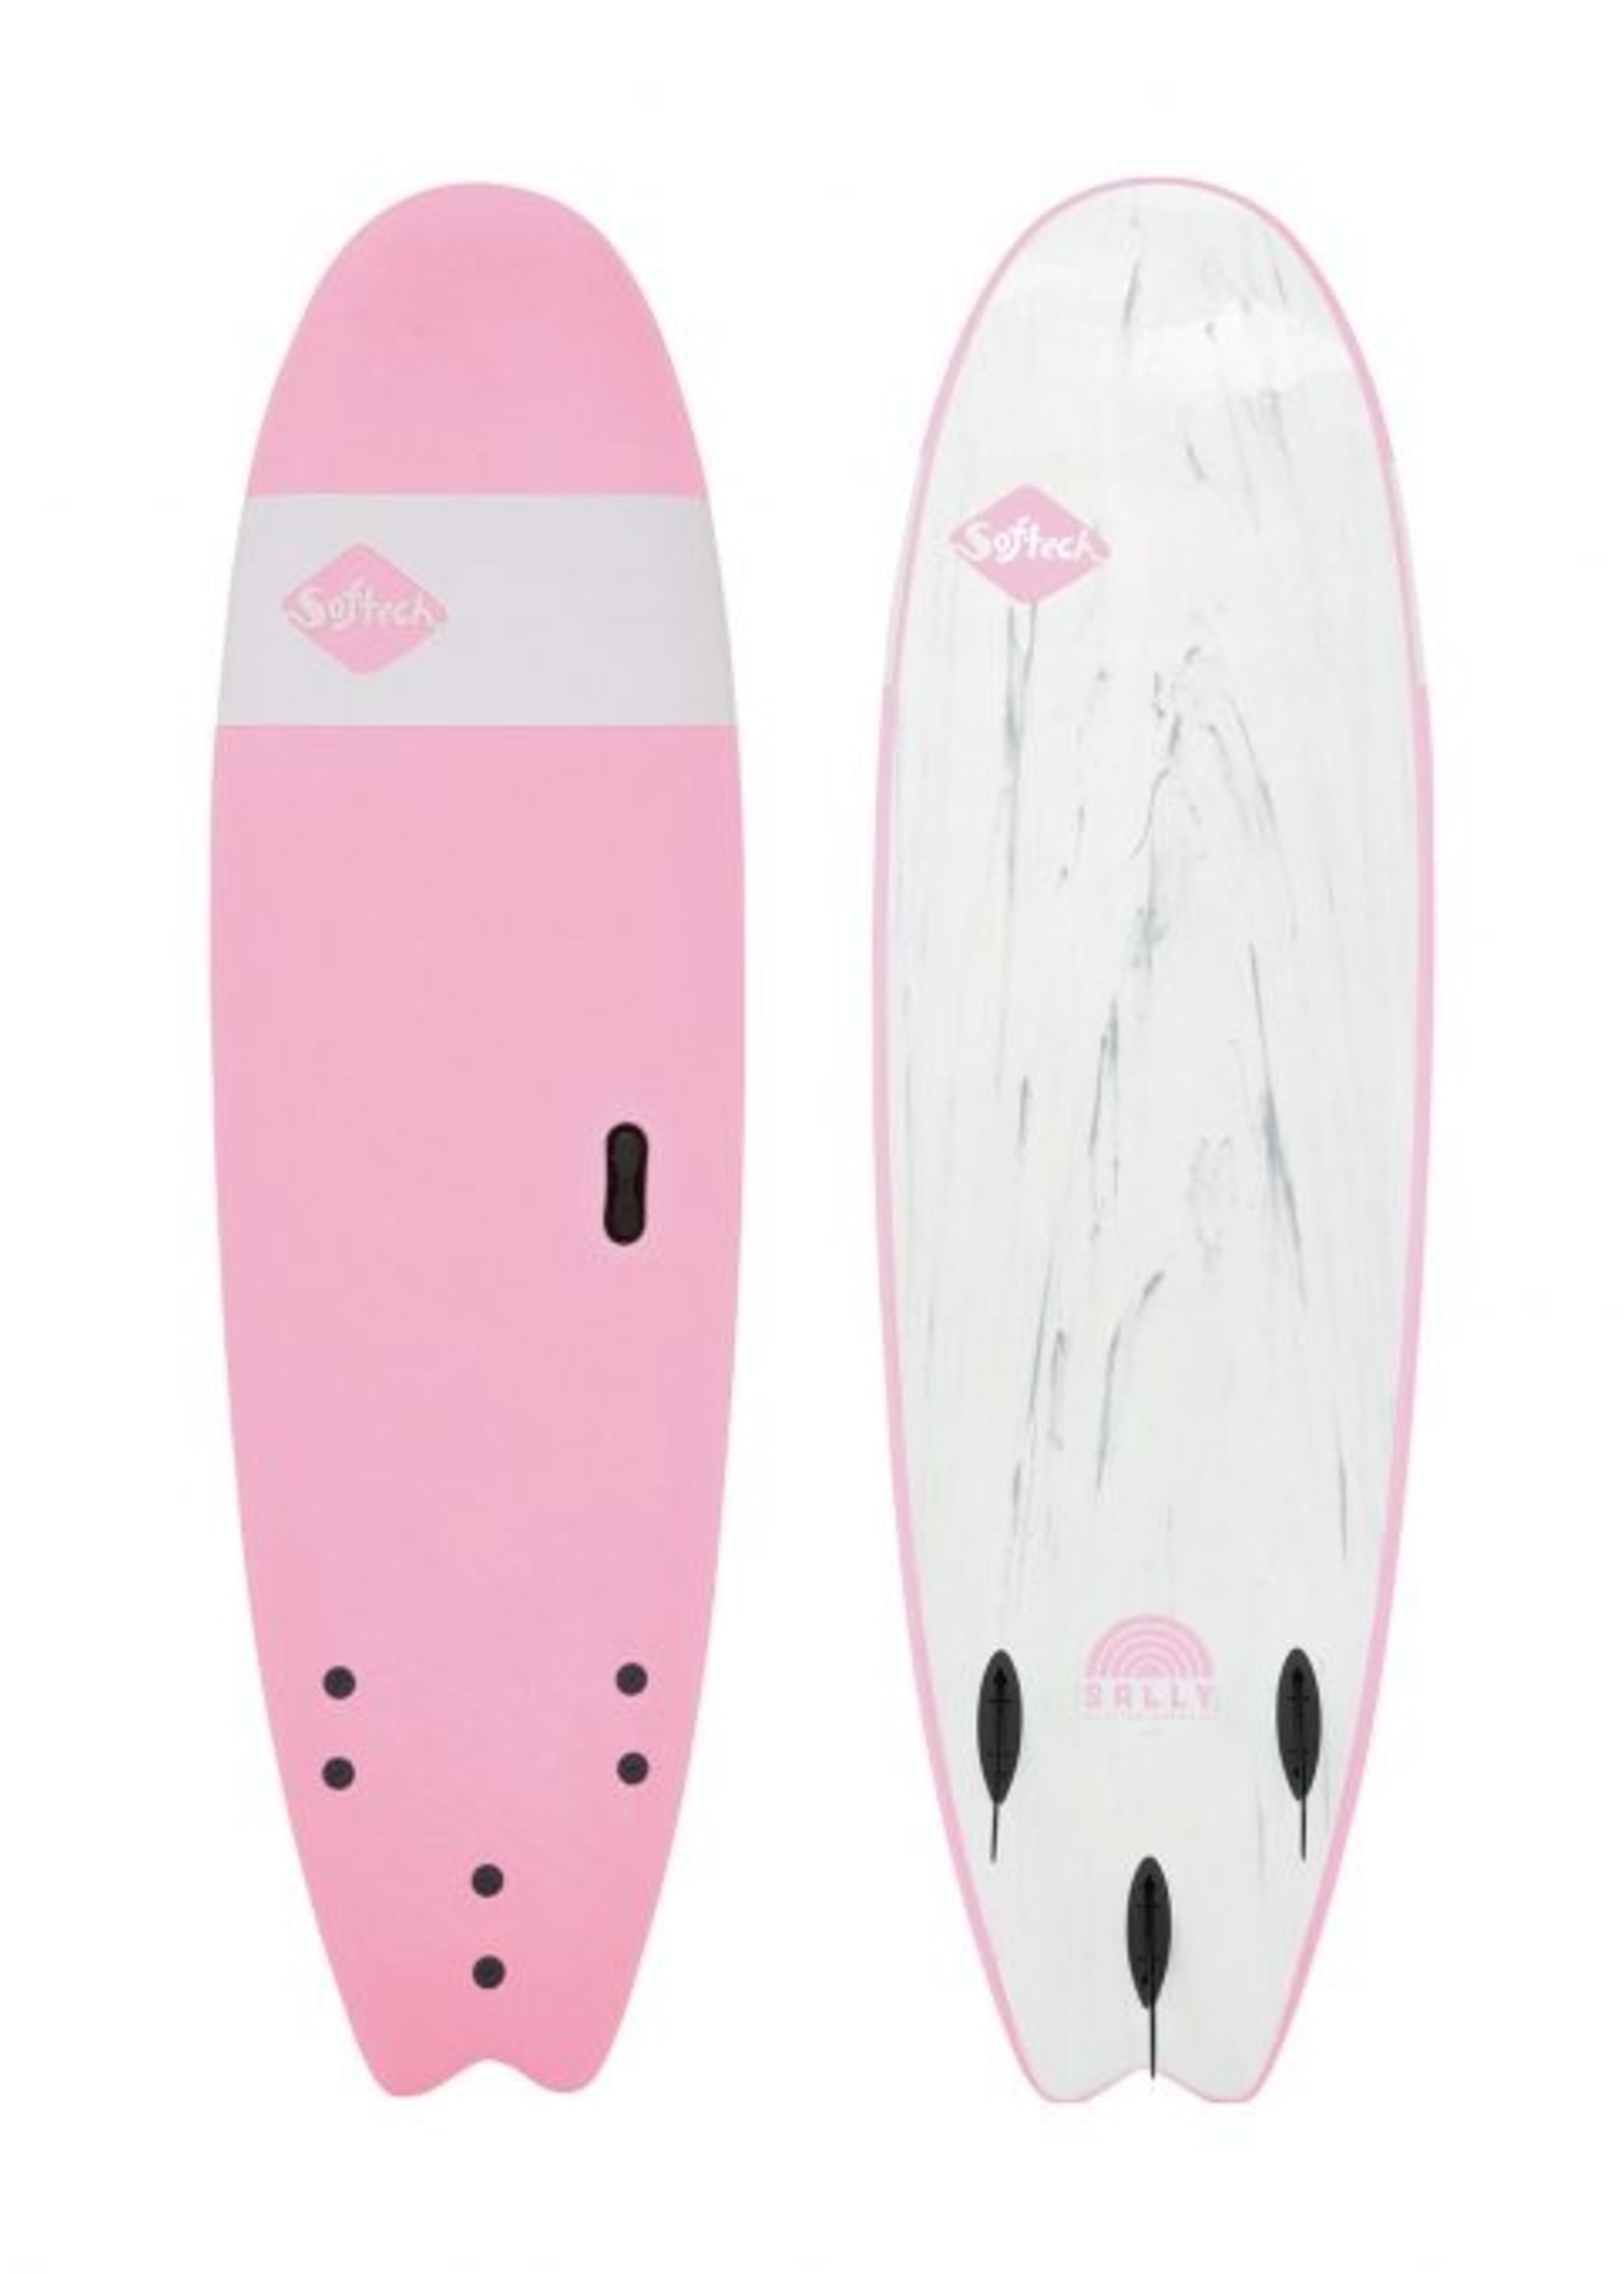 Softech Softech Sally Fitzgibbons Funboard 6'6